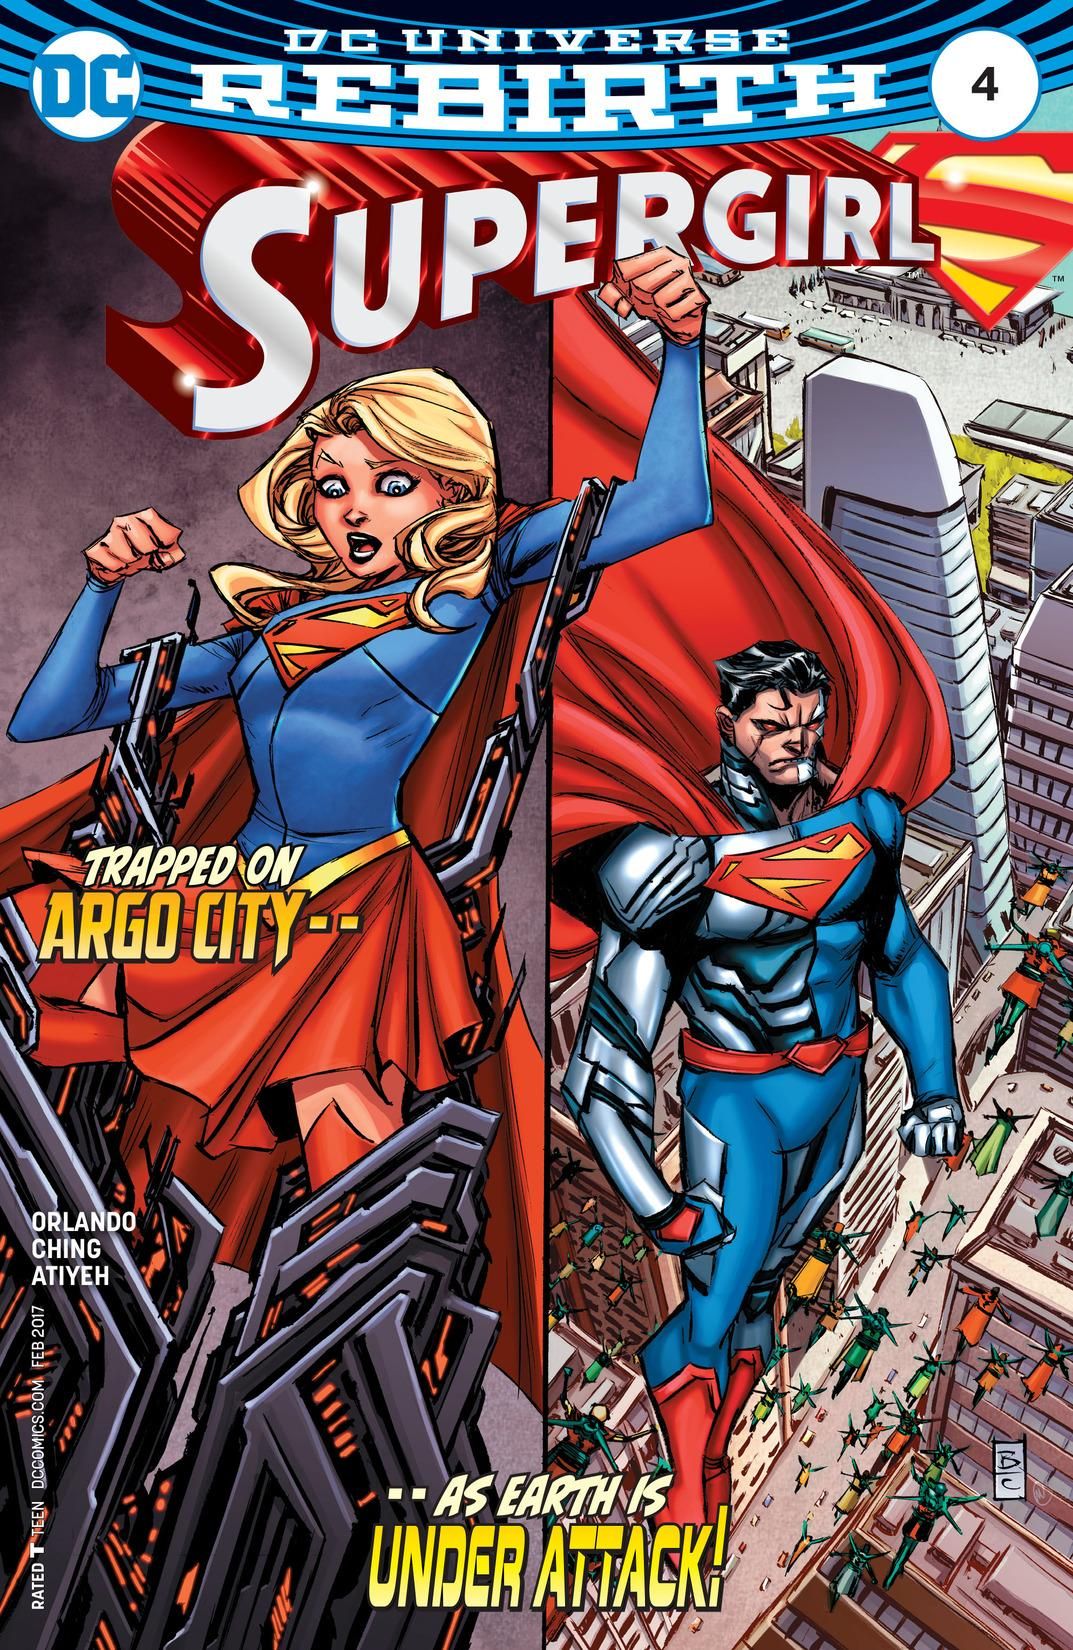 Supergirl Vol 7 4 | DC Database | FANDOM powered by Wikia